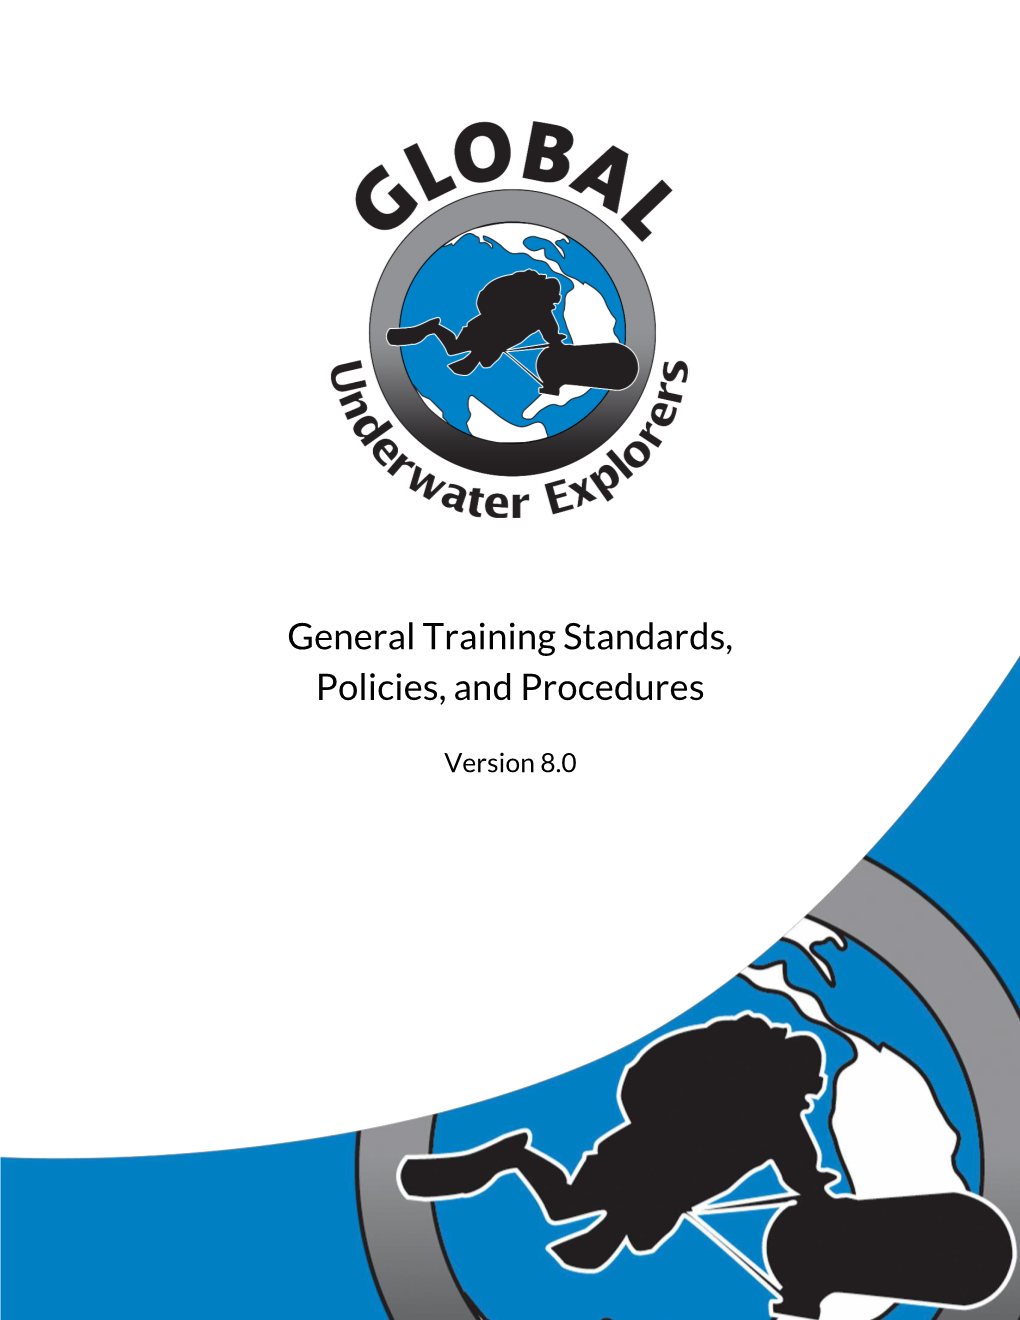 General Training Standards, Policies, and Procedures